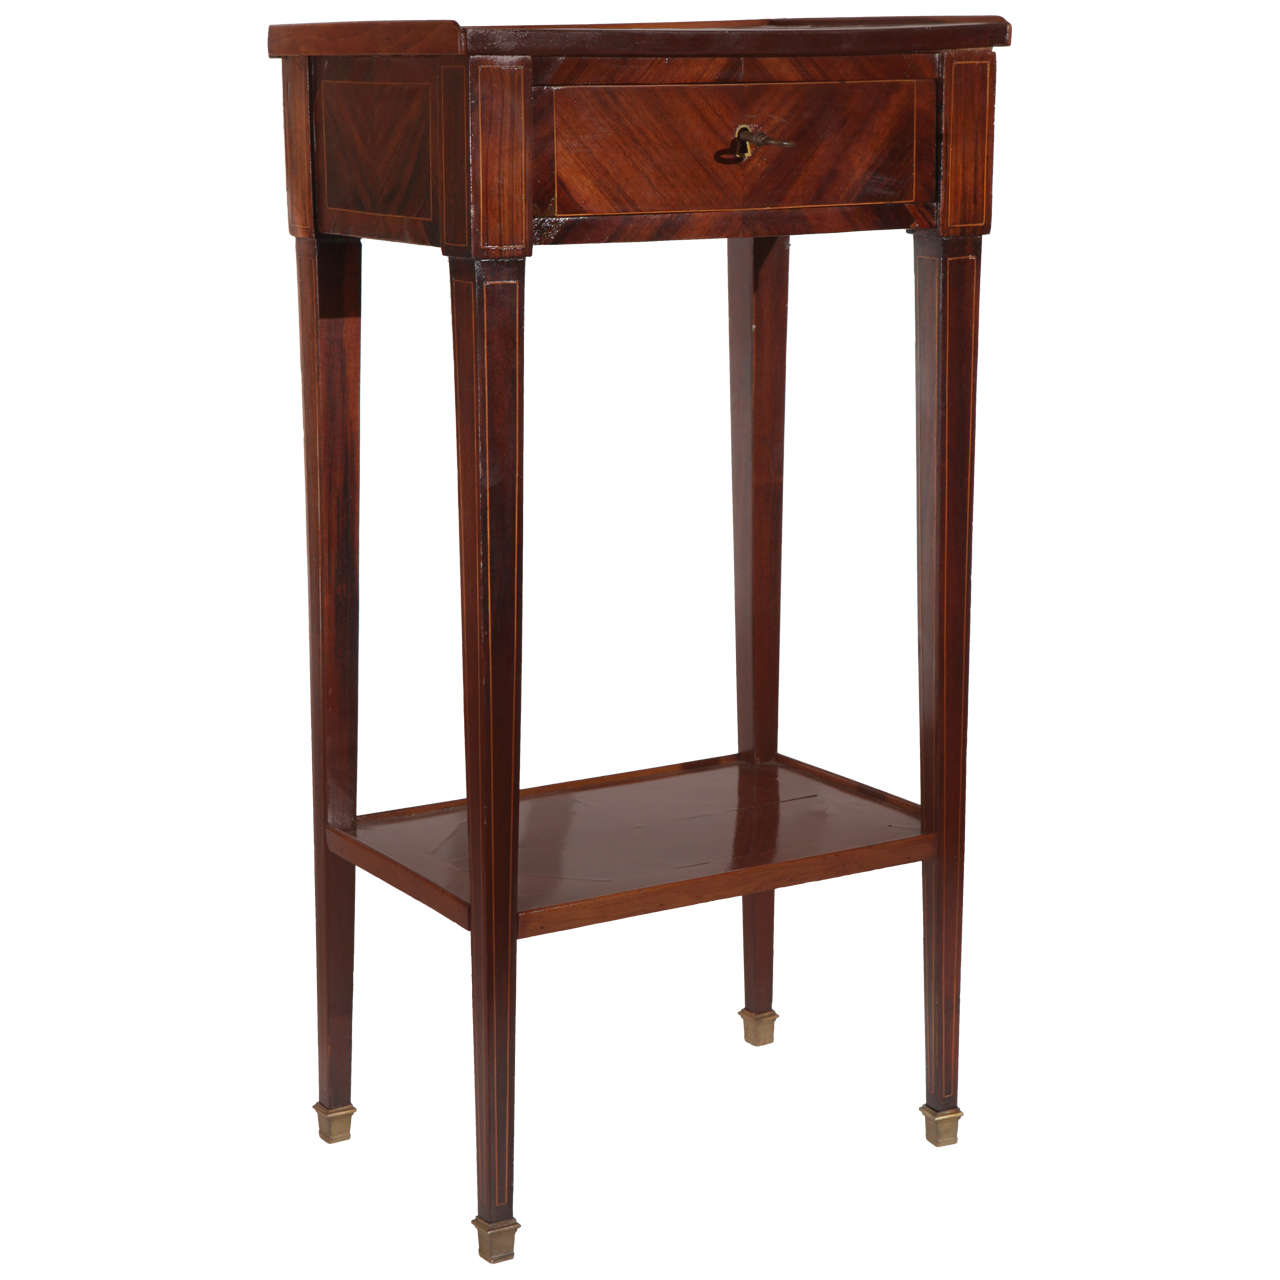 1870s, French Side Table